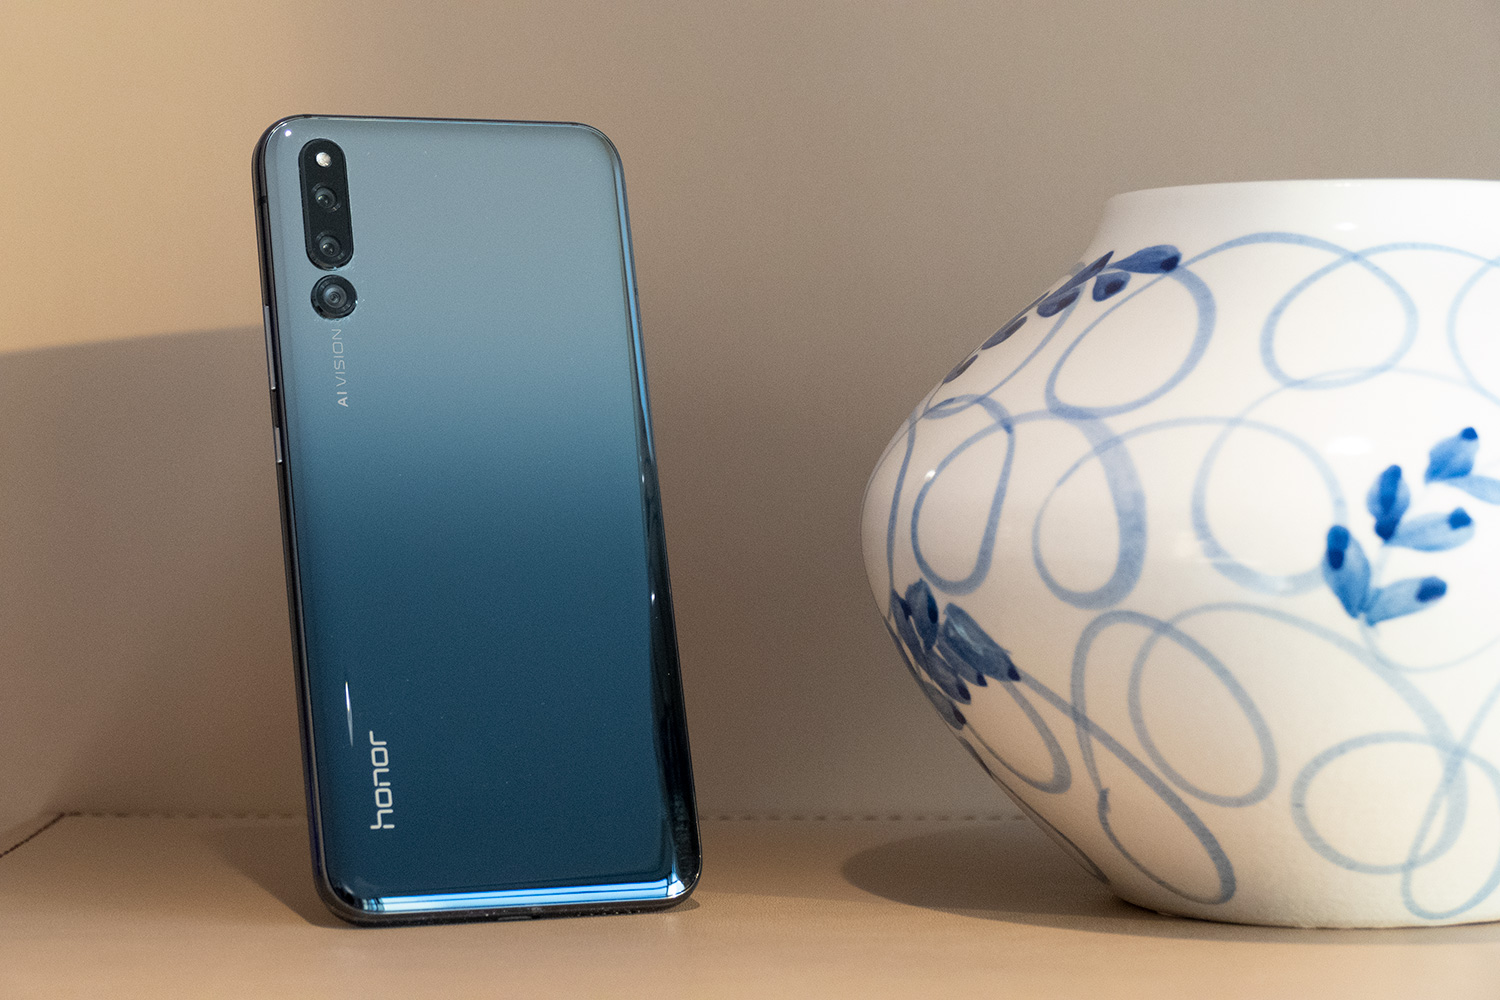 Official photos show Honor Magic 2's slide-out camera, colorful back